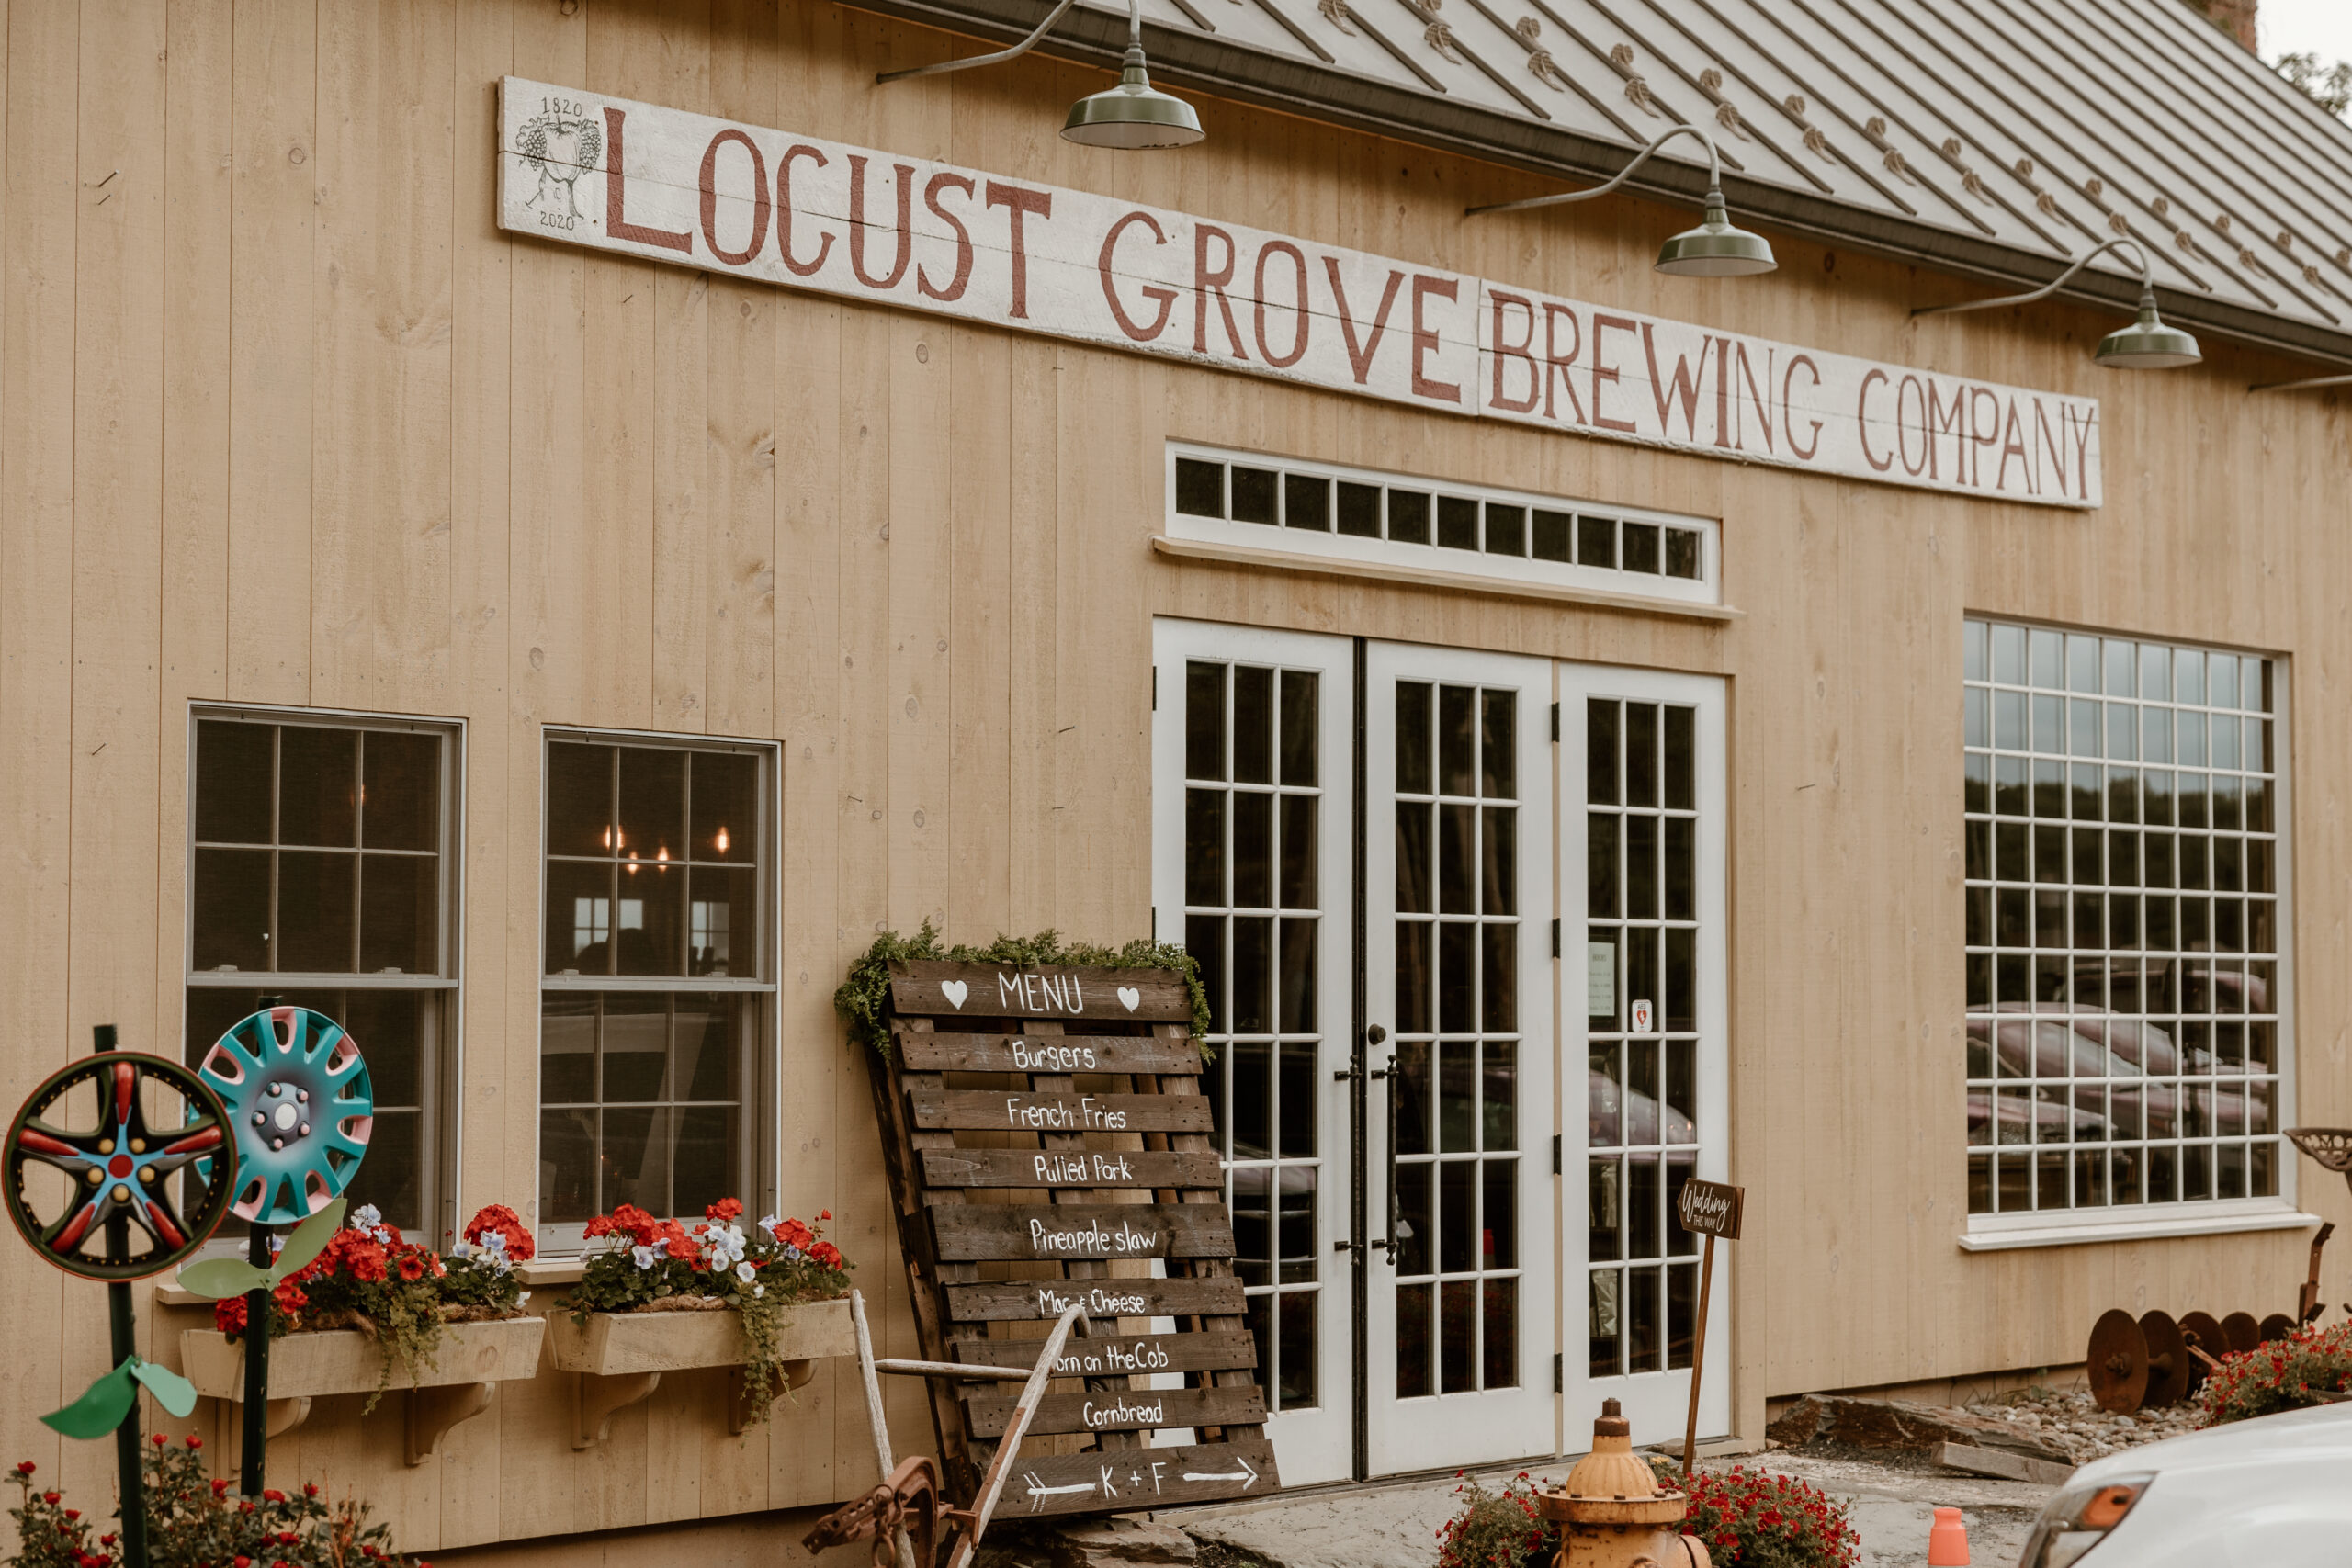 Exterior of Locust Grove Brewing Company with a rustic wooden façade, vintage wheel decorations, and a menu board displaying casual dining options.